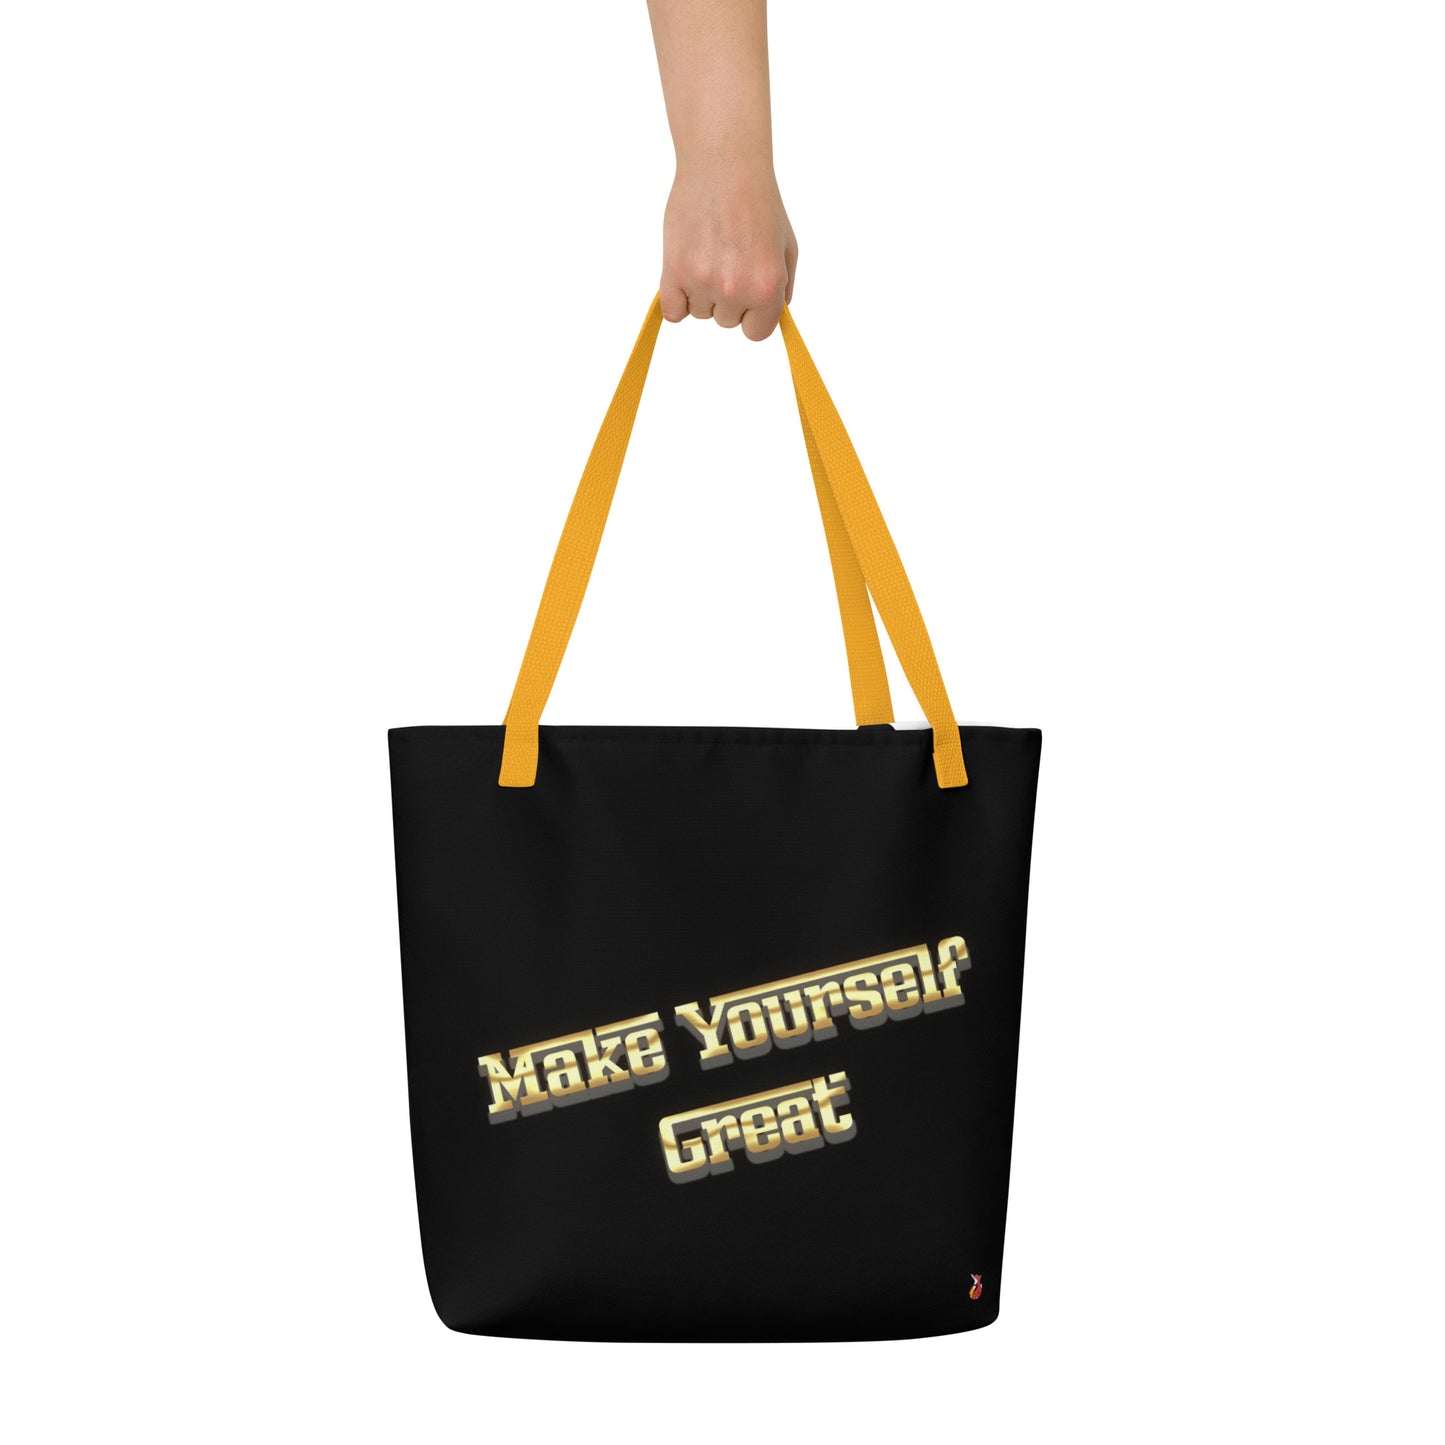 Snooty Fox Art Everyday Tote Bag - Make Yourself Great